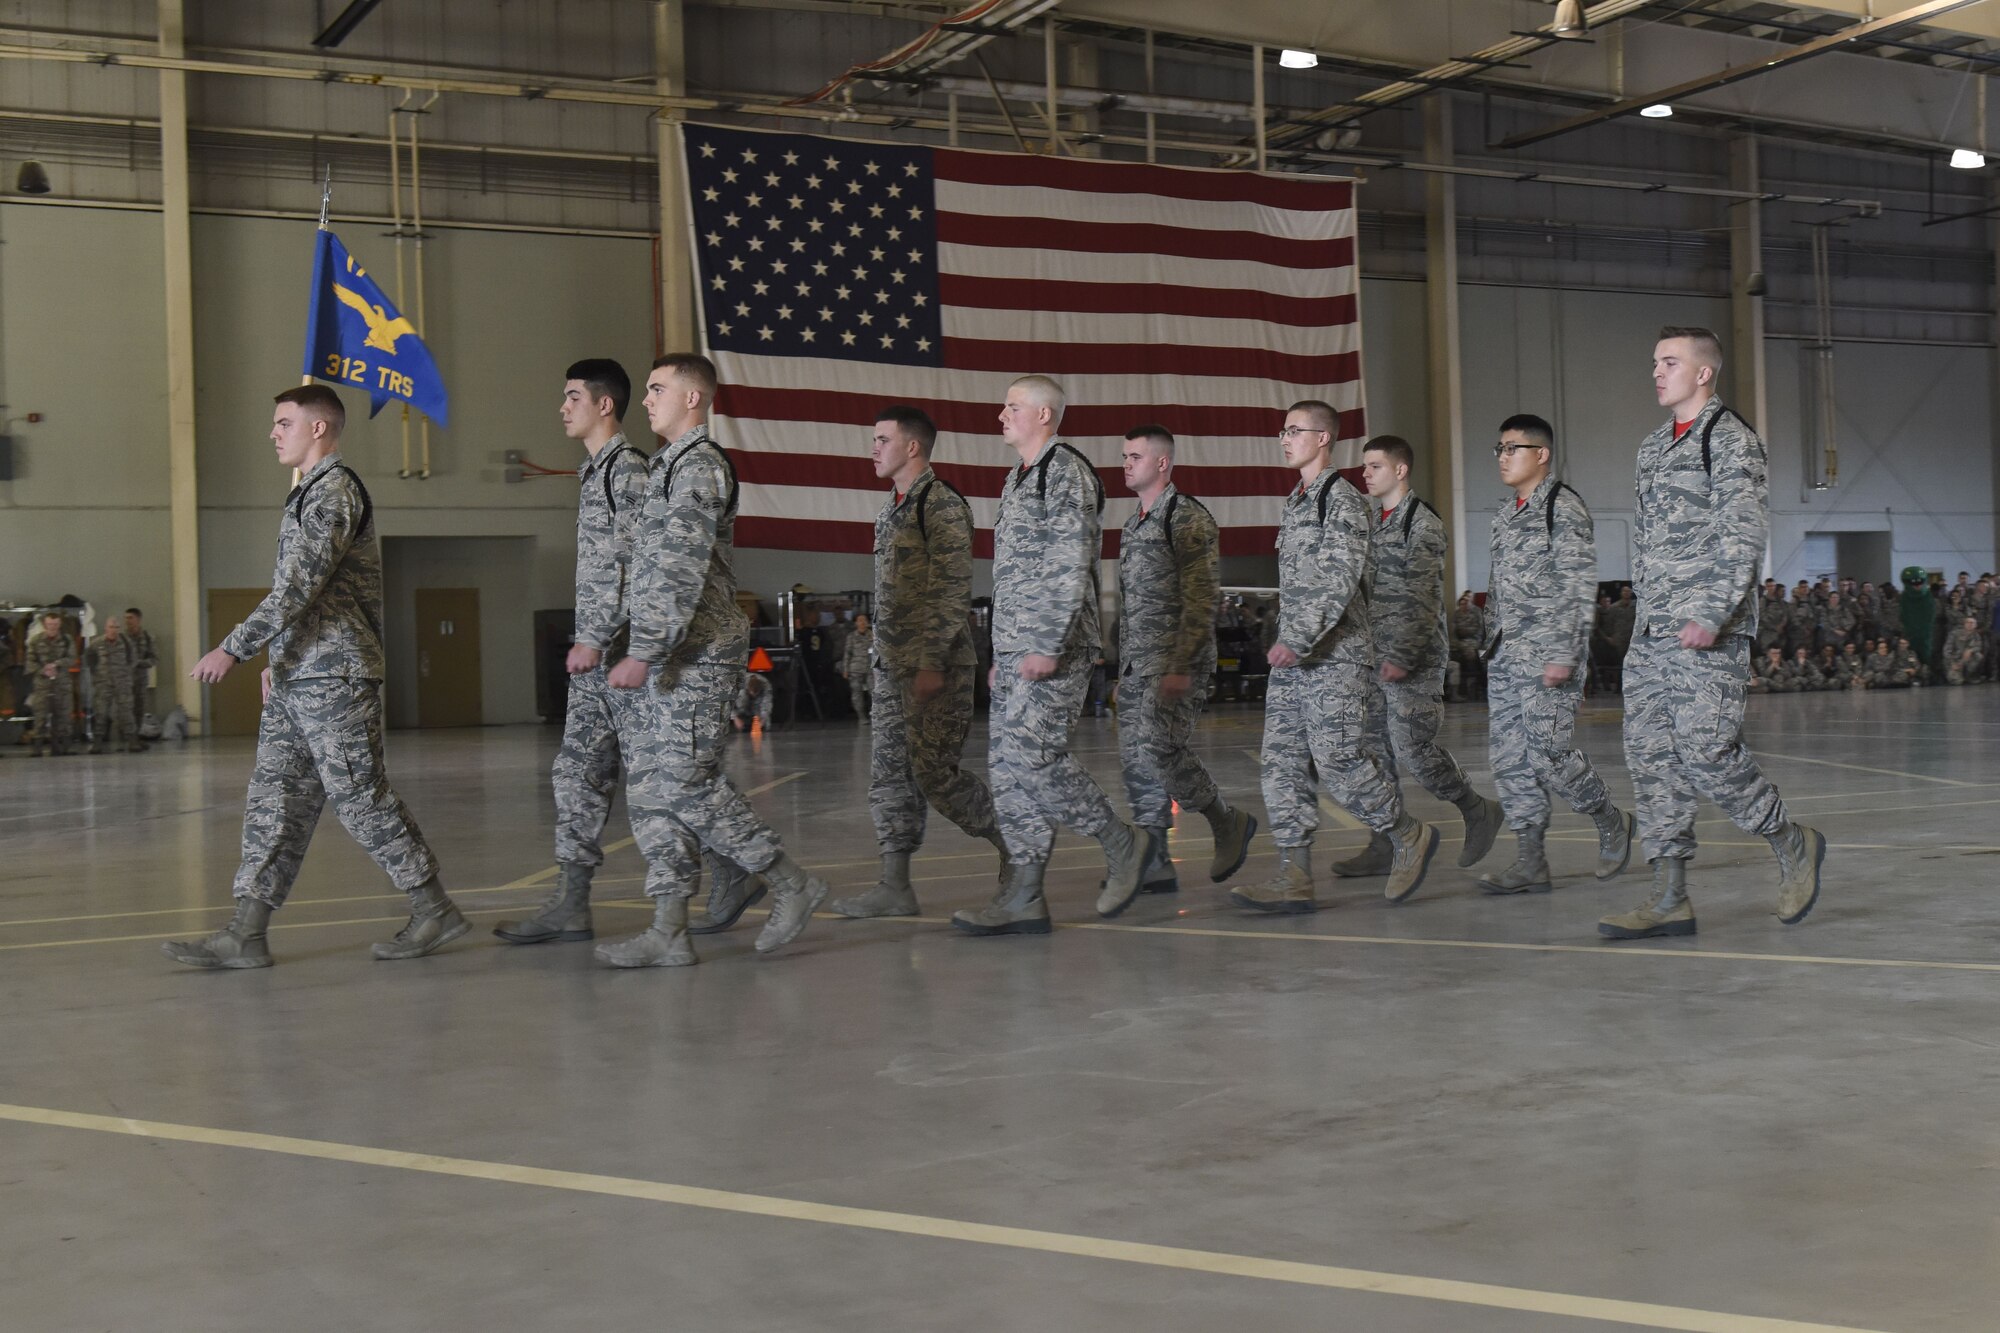 The 312th Training Squadron drill team performs their routine during the regulation drill segment during the 17th Training Group drill competition at the Louis F. Garland Department of Defense Fire Academy on Goodfellow Air Force Base, Texas, Dec. 15, 2017. The regulation drill segment was the first of the three judged events in the drill competition. (U.S. Air Force Photo by Airman 1st Class Zachary Chapman/Released)